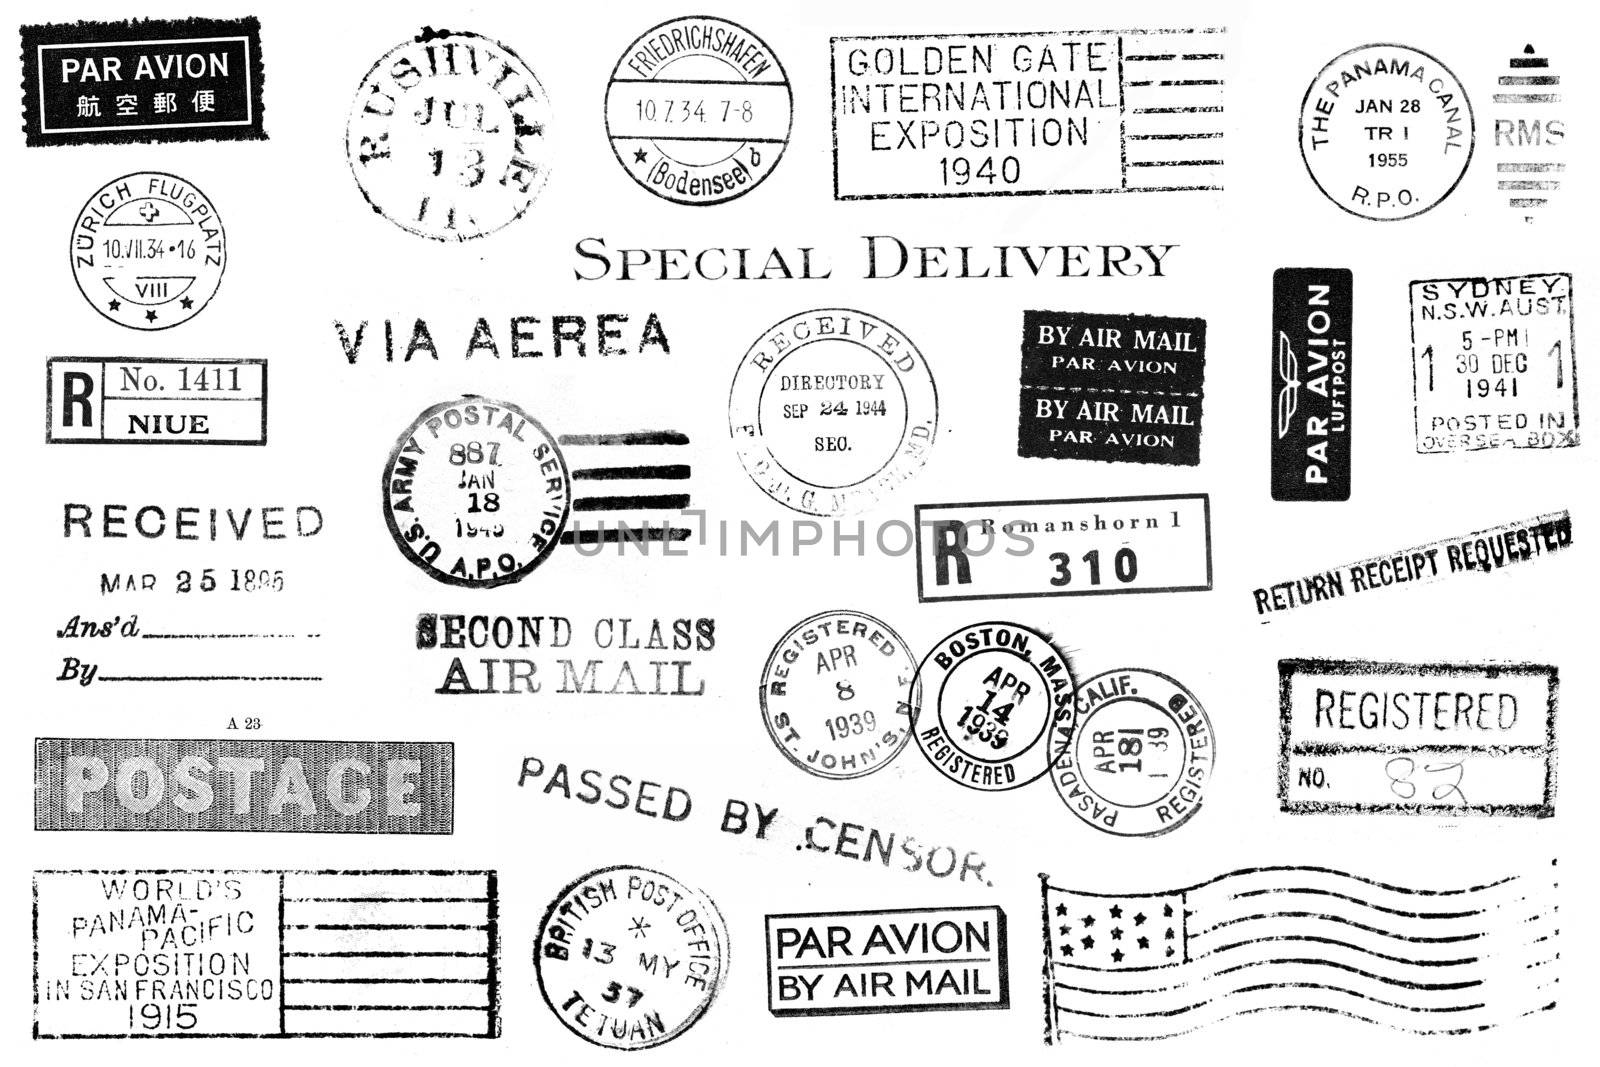 A set of nineteen large postal marks mostly from the 1930s and 1940s isolated on white. Ideal for photoshop brushes, retro collages, etc.